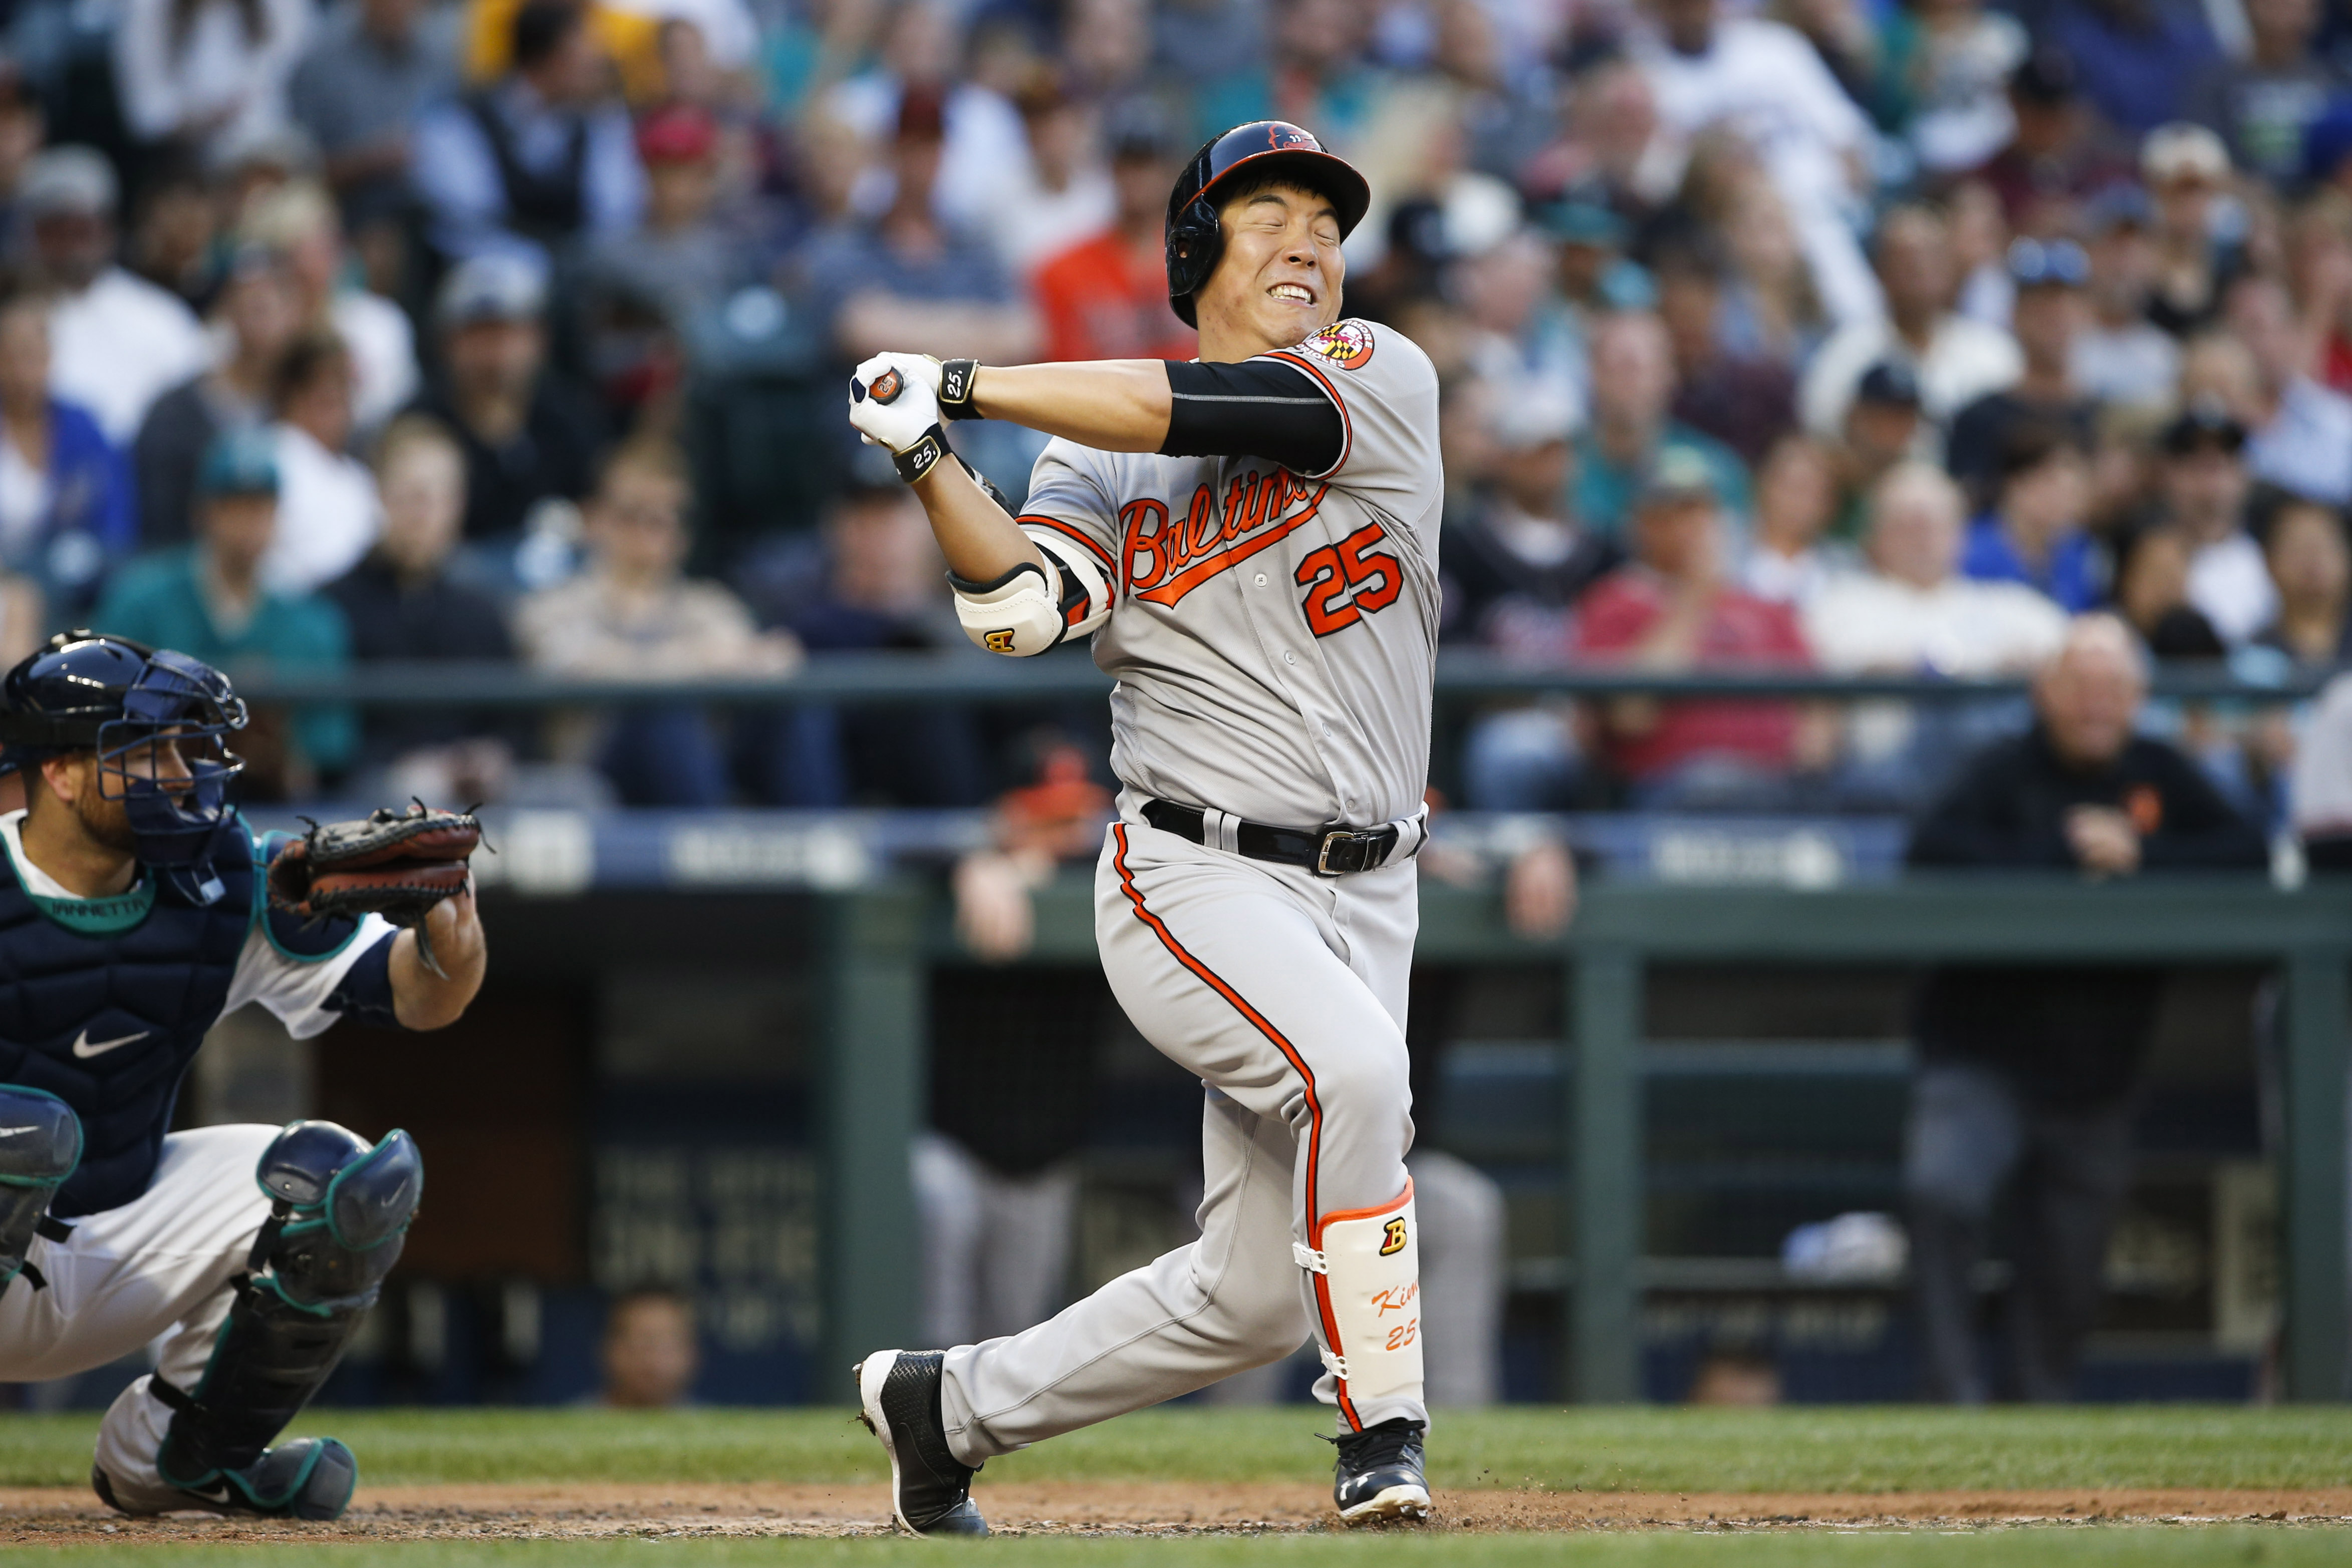 Orioles, Hyun Soo Kim set June home run record with 56 in loss to